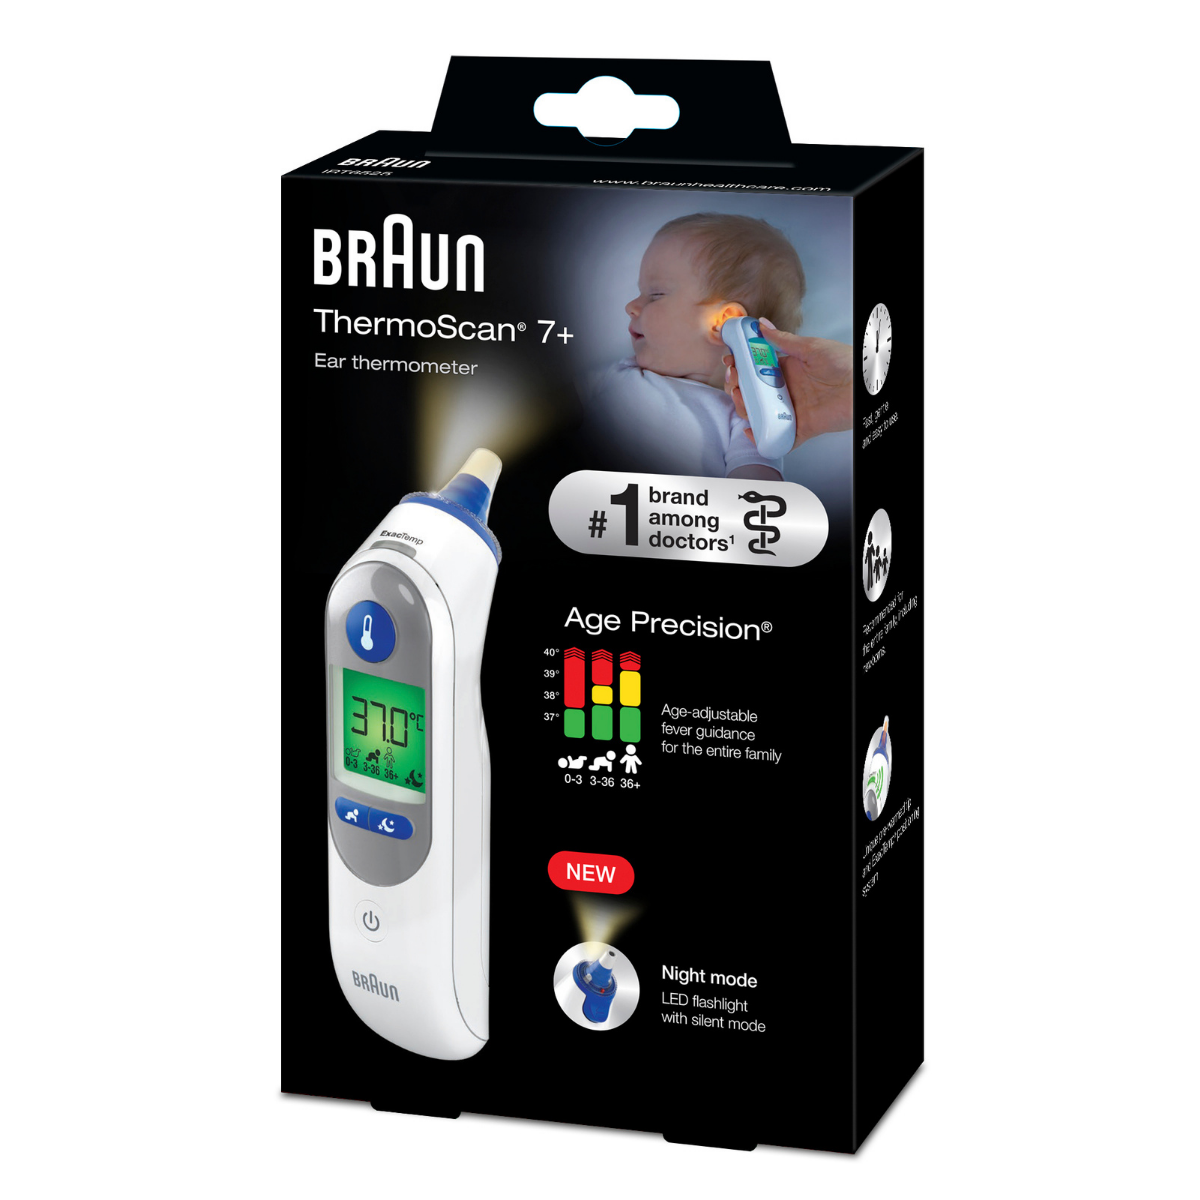 Braun ThermoScan® 7+ Ear thermometer with Night Mode - How to use 